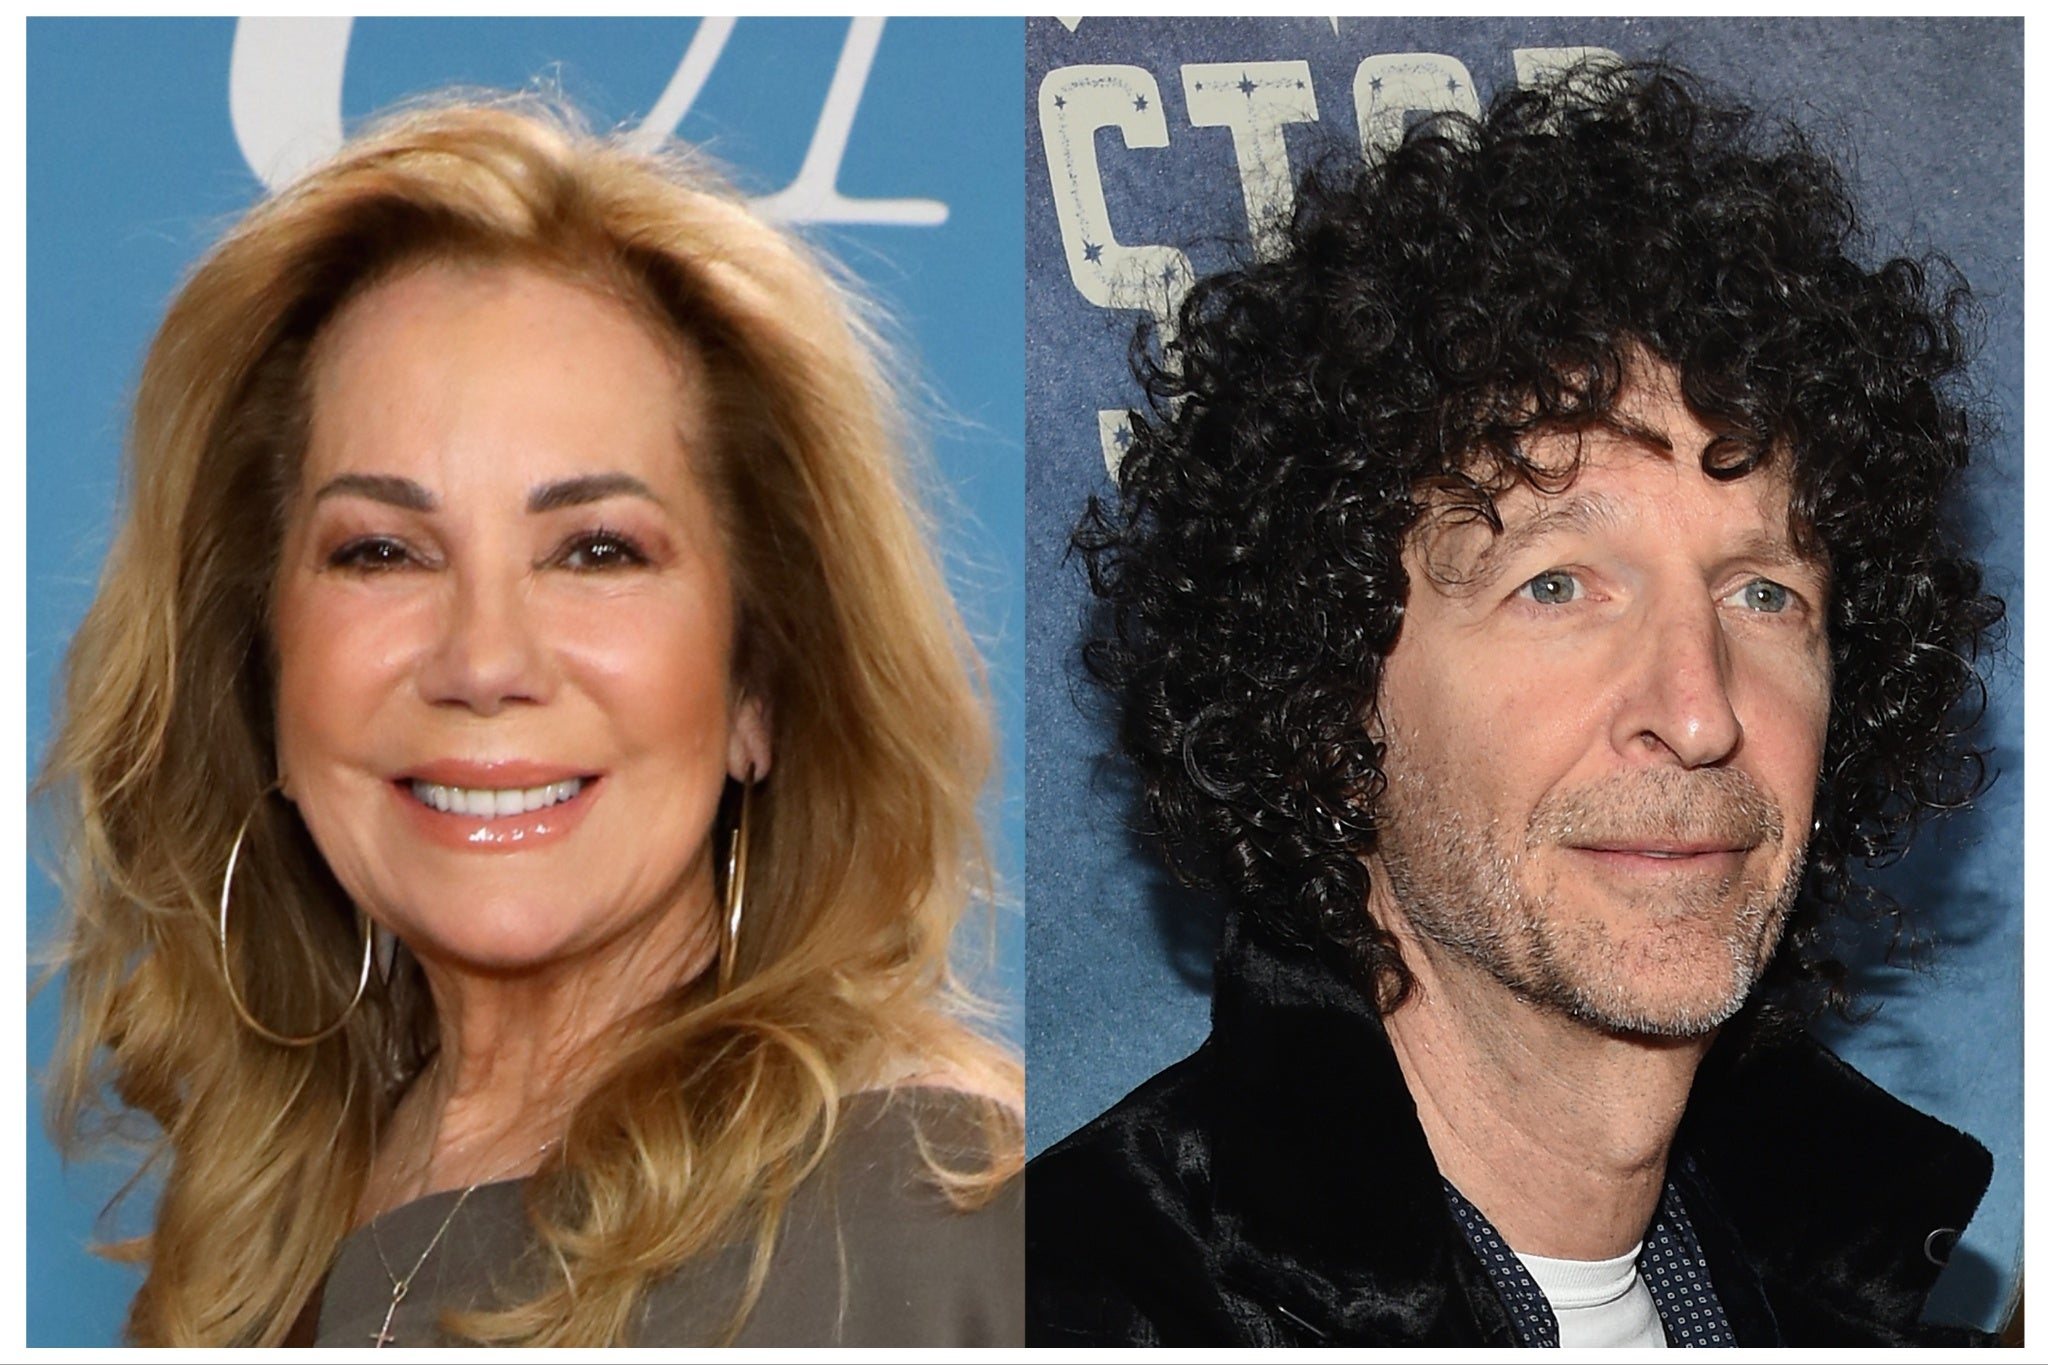 Howard Stern asked his listeners to boo Kathie Lee Gifford when she performed ‘The Star-Spangled Banner’ at the Super Bowl in 1995